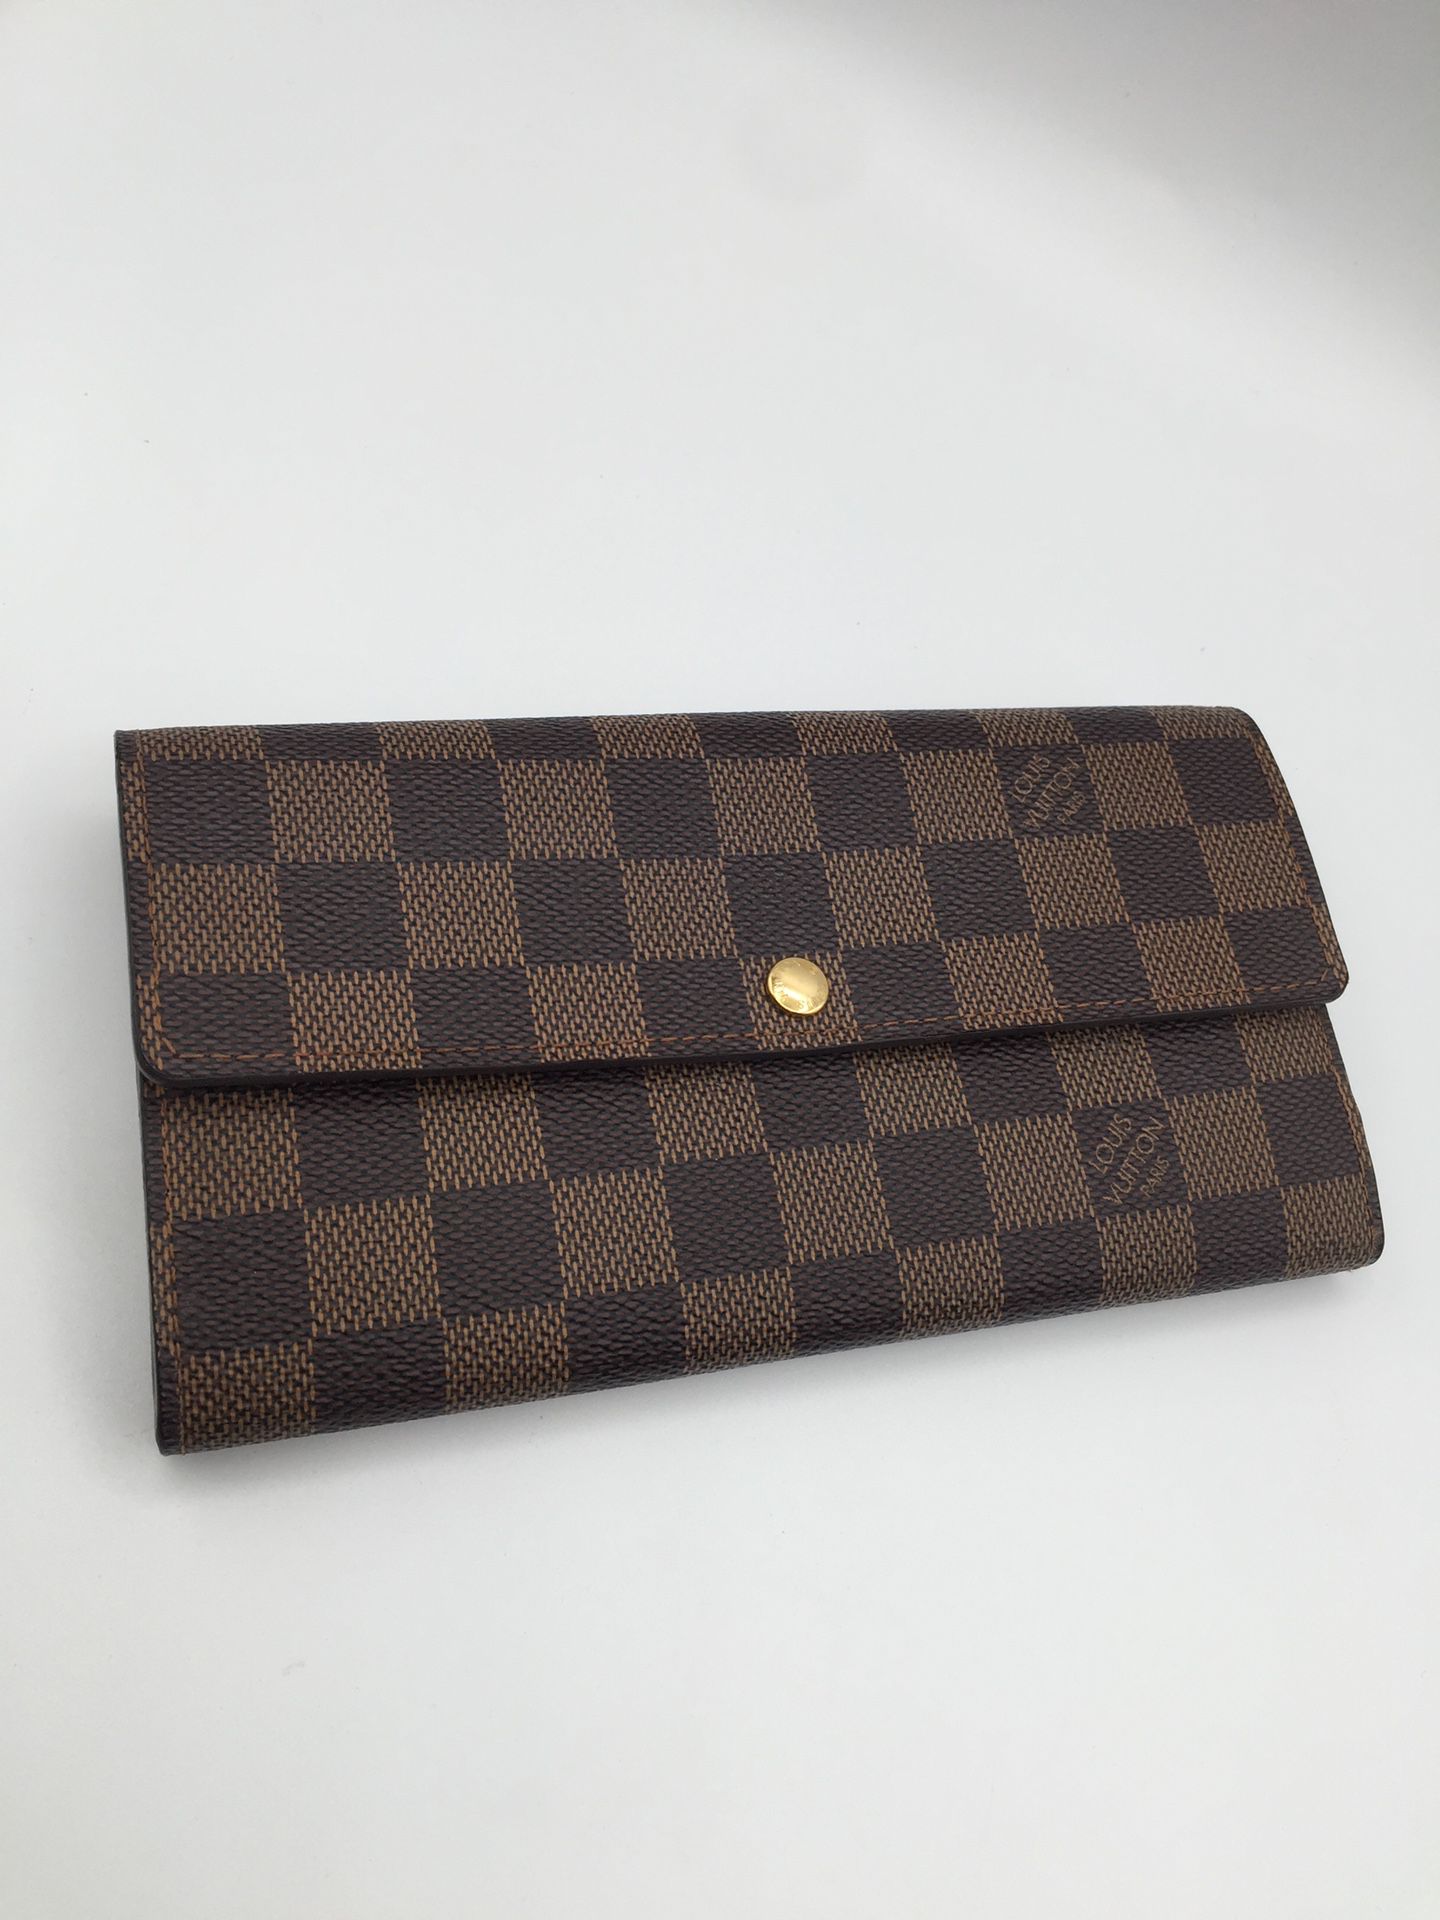 Louis Vuitton Damier Ebene Sarah Wallet Authentic for Sale in Fort Wayne,  IN - OfferUp